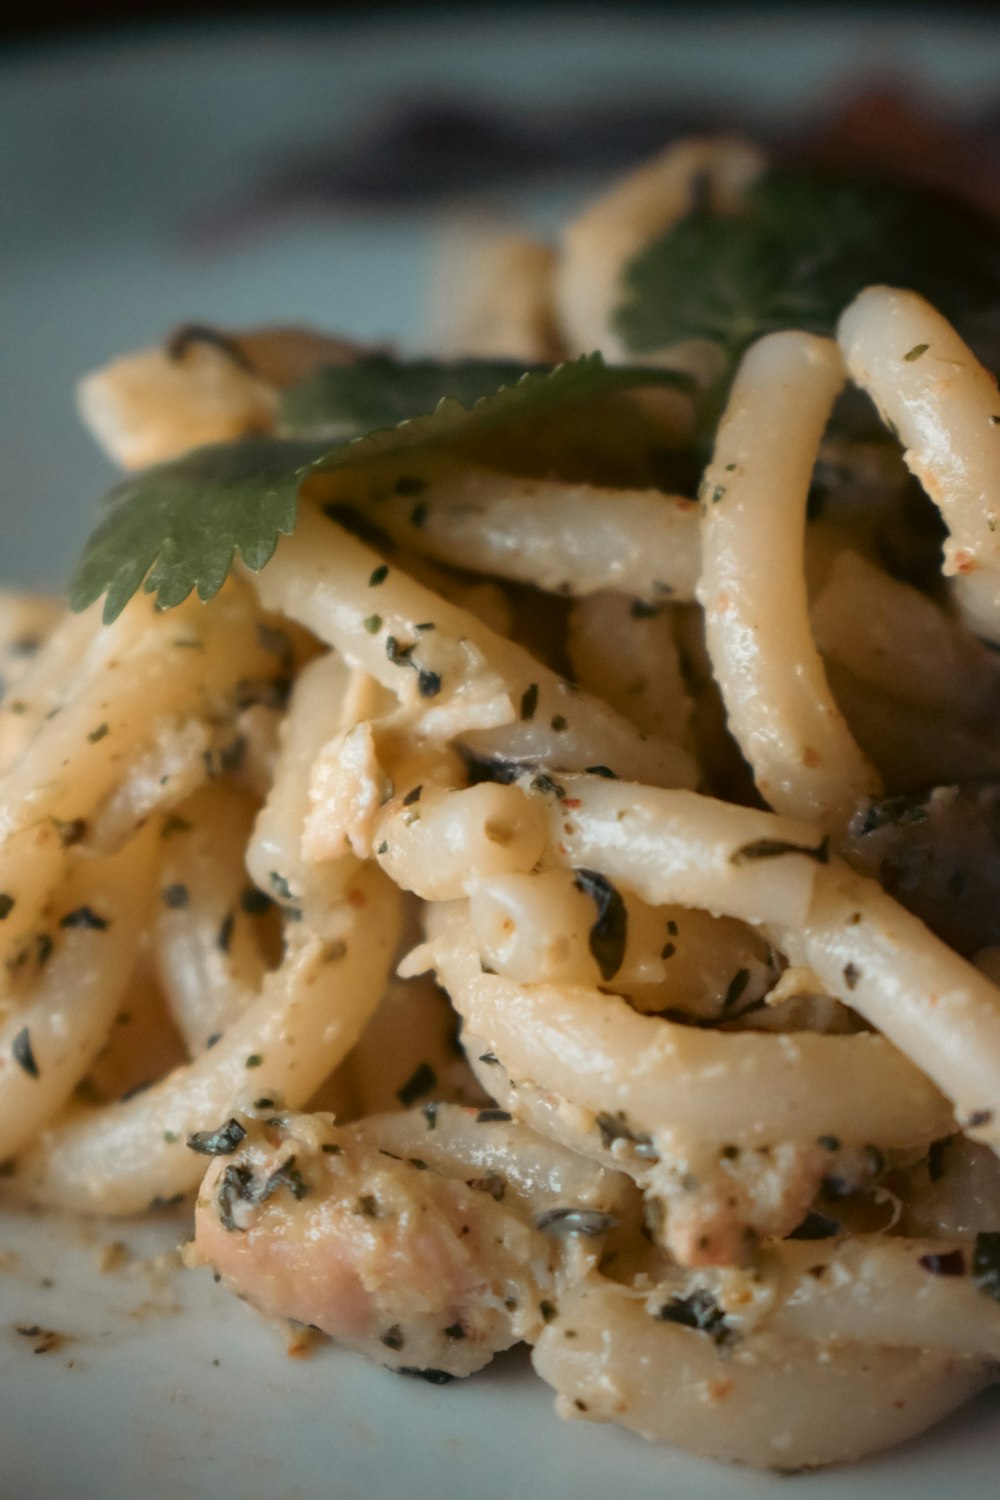 a close up of a plate of food with pasta